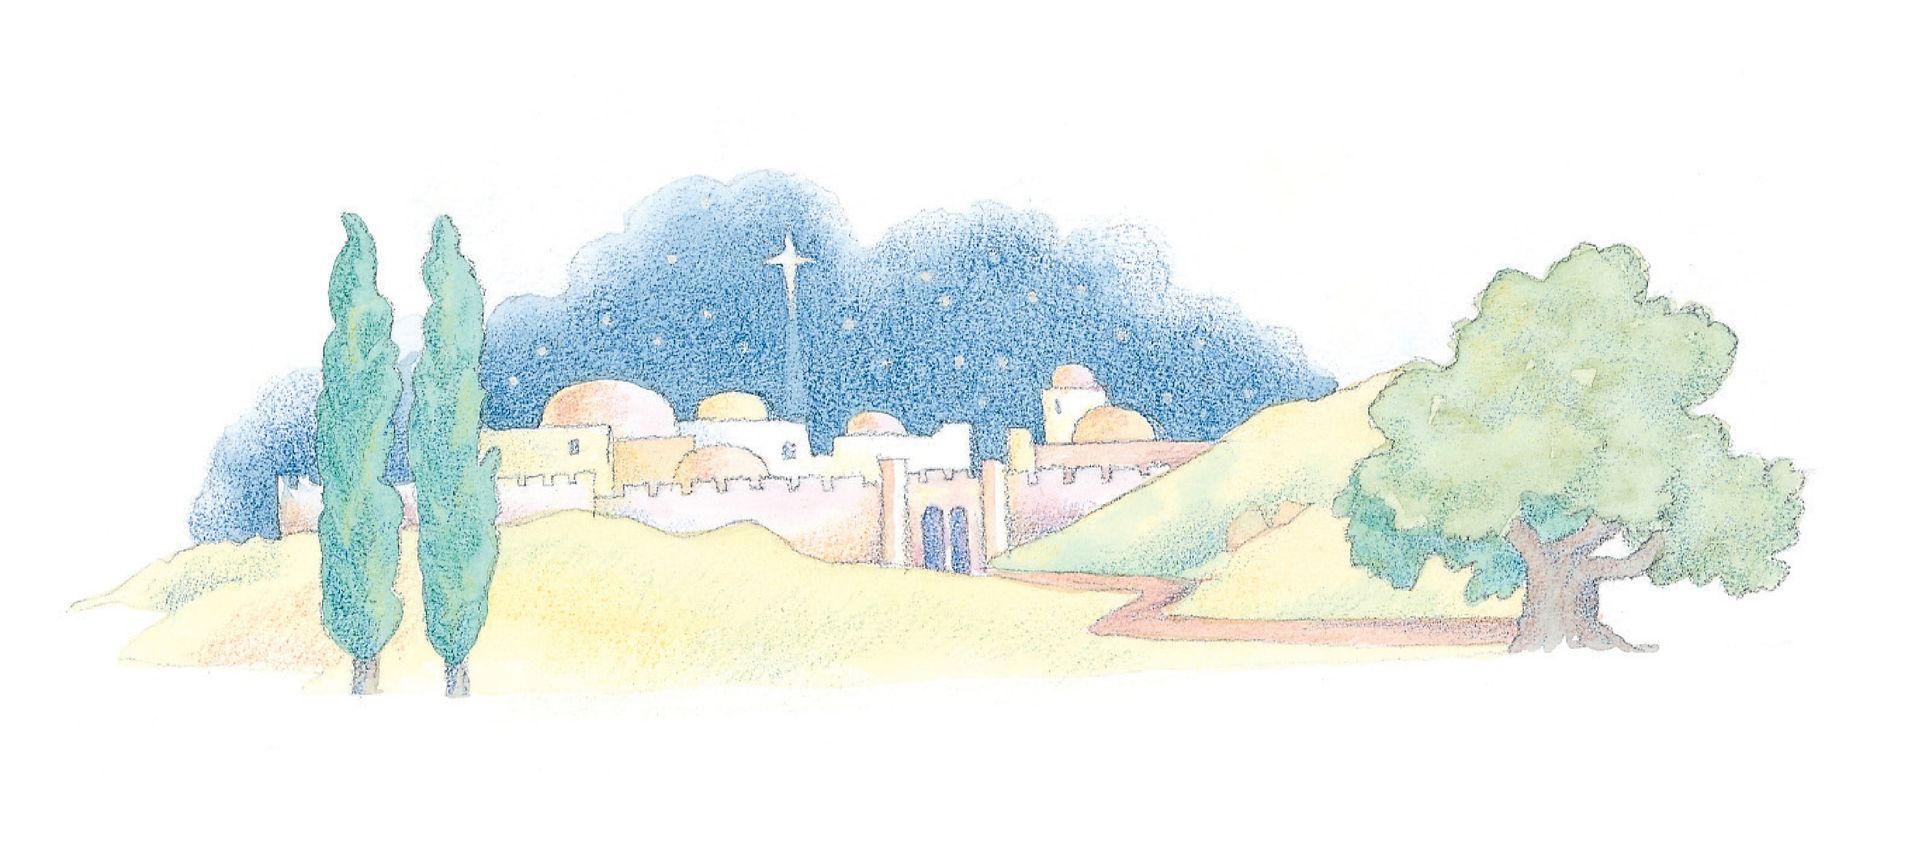 Bethlehem at night. From the Children’s Songbook, page 37, “Stars Were Gleaming”; watercolor illustration by Phyllis Luch.